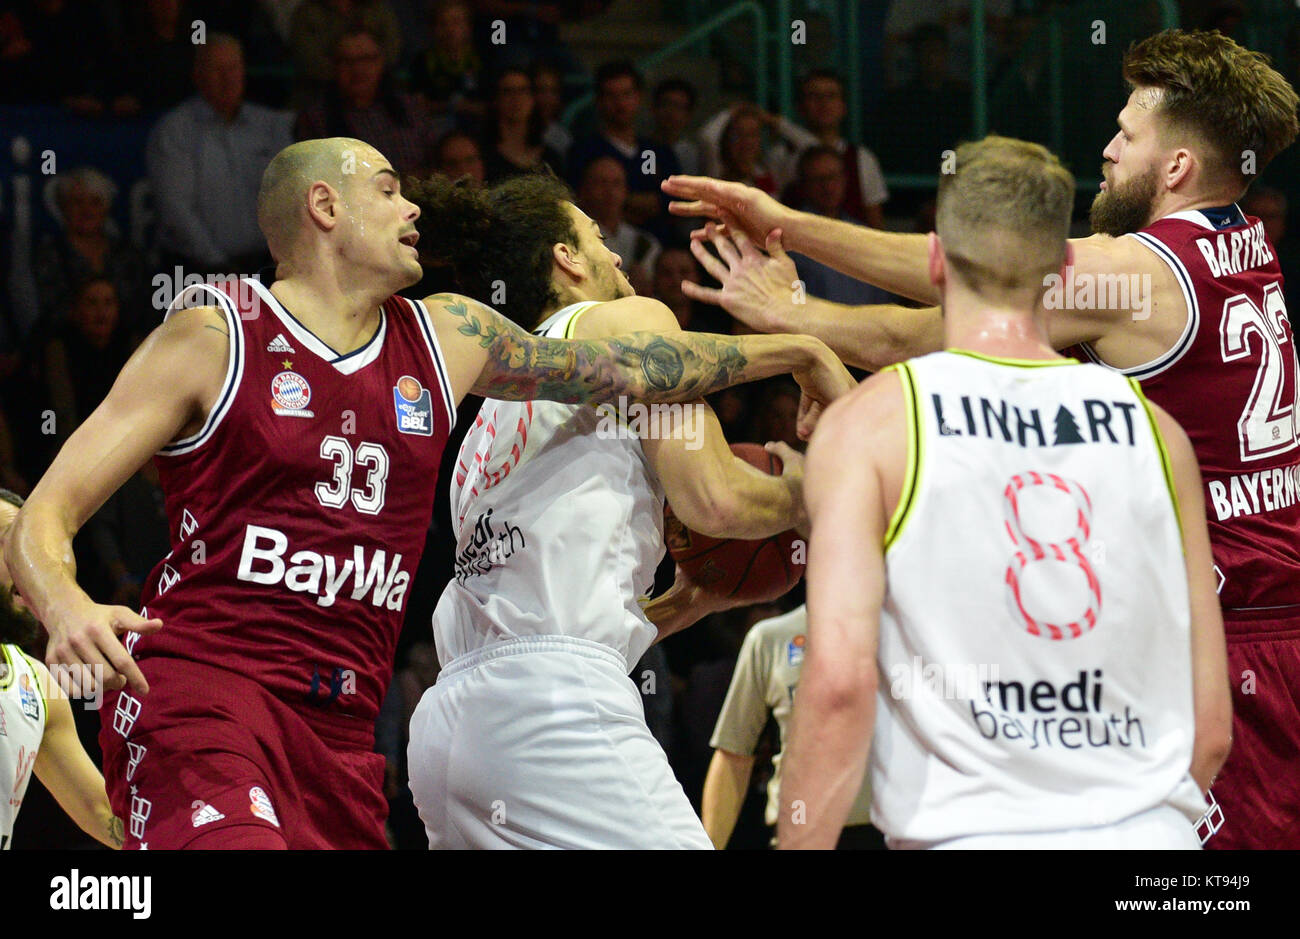 Bayreuth, Germany. 22nd Dec, 2017. Bayern's Maik Zirbes (l) and Danilo Barthel (r) vie for the ball with Bayreuth's Assem Marei (2.f.l.) and Nate Linhart (2.f.r.) during the German Bundesliga basketball game between medi Bayreuth and FC Bayern Munich at the Oberfrankenhalle in Bayreuth, Germany, 22 December 2017. Credit: Nicolas Armer/dpa/Alamy Live News Stock Photo